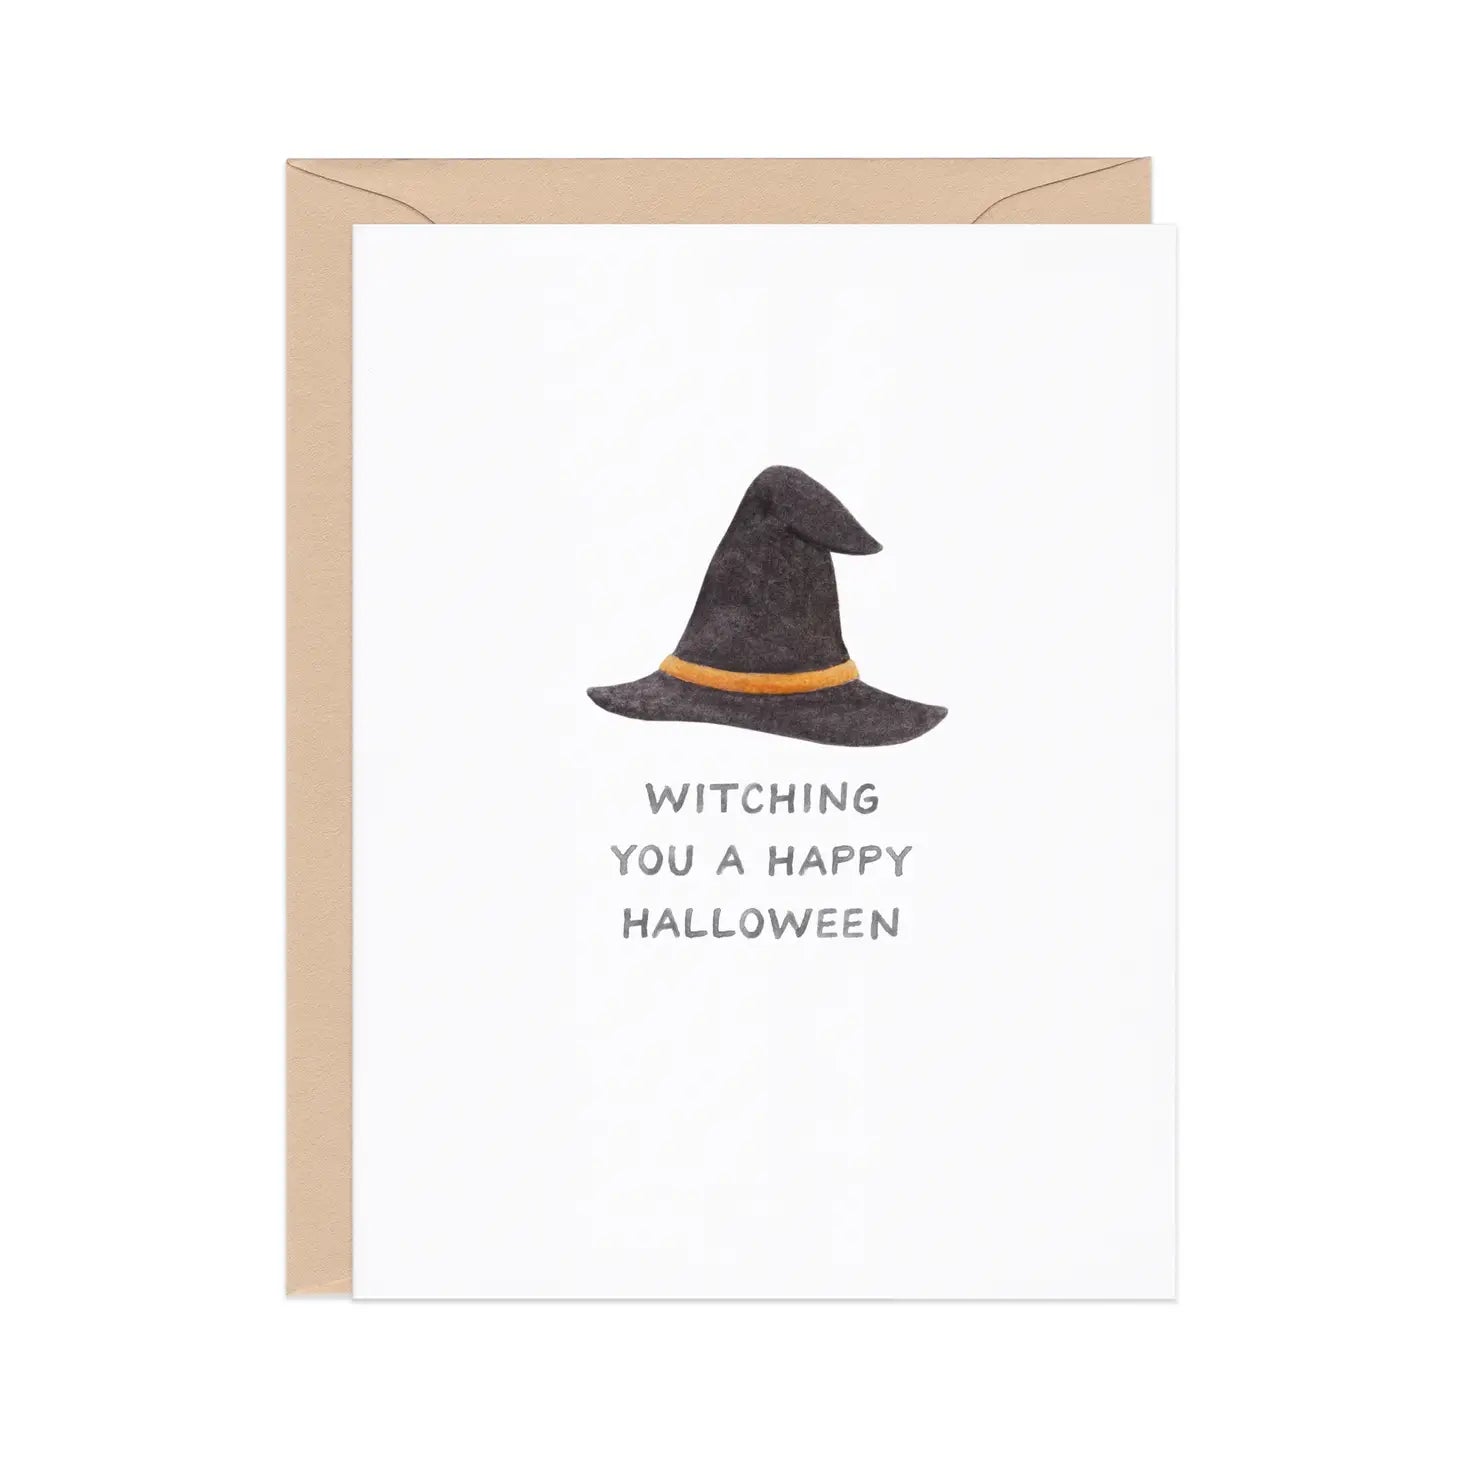 Witching You a Happy Halloween card